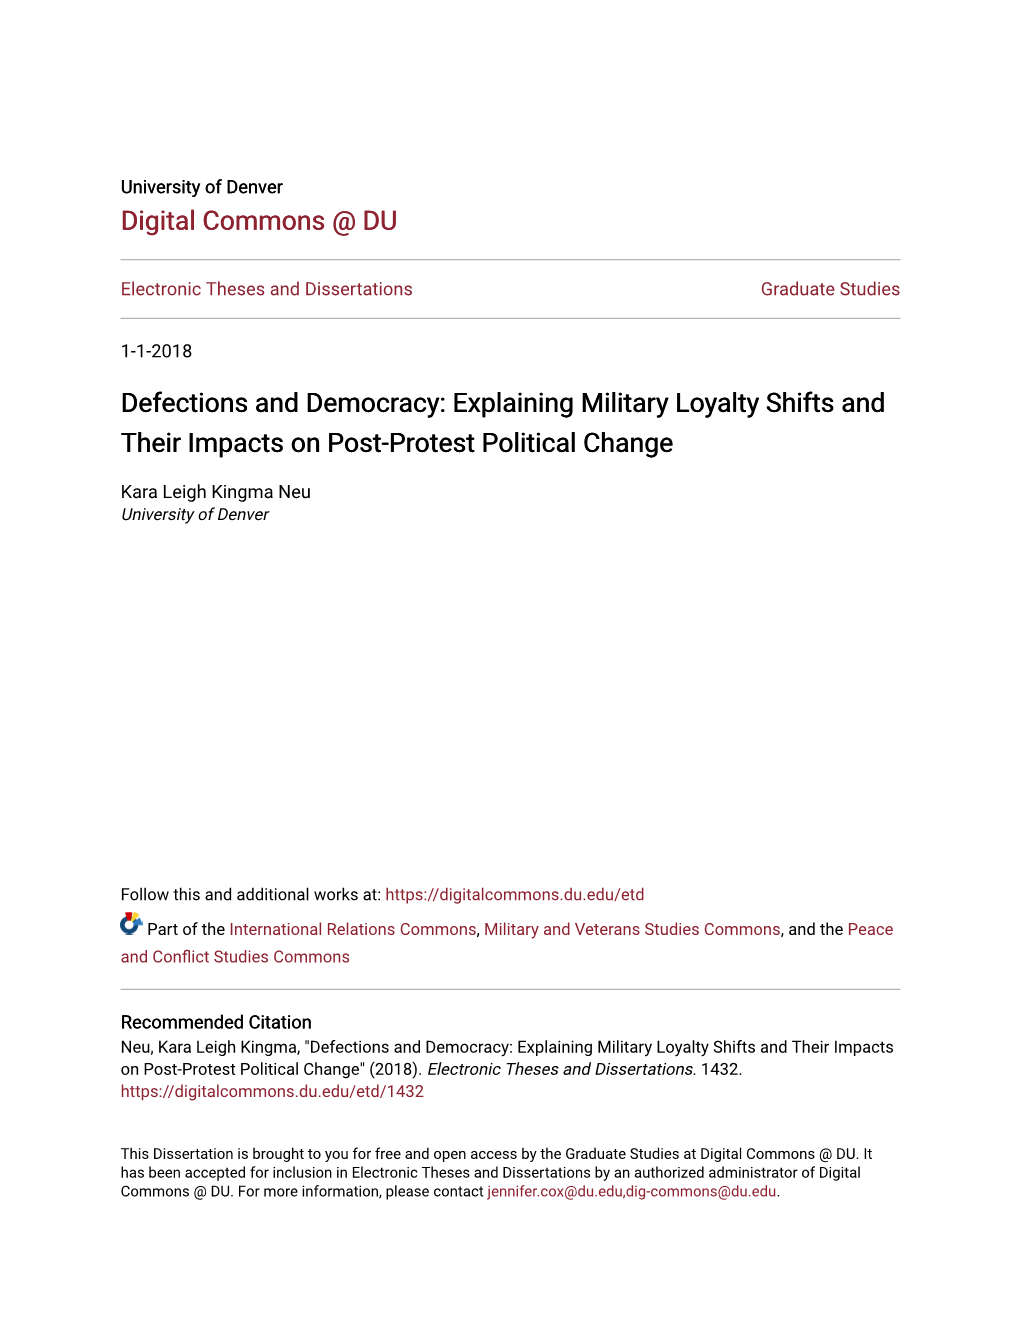 Defections and Democracy: Explaining Military Loyalty Shifts and Their Impacts on Post-Protest Political Change